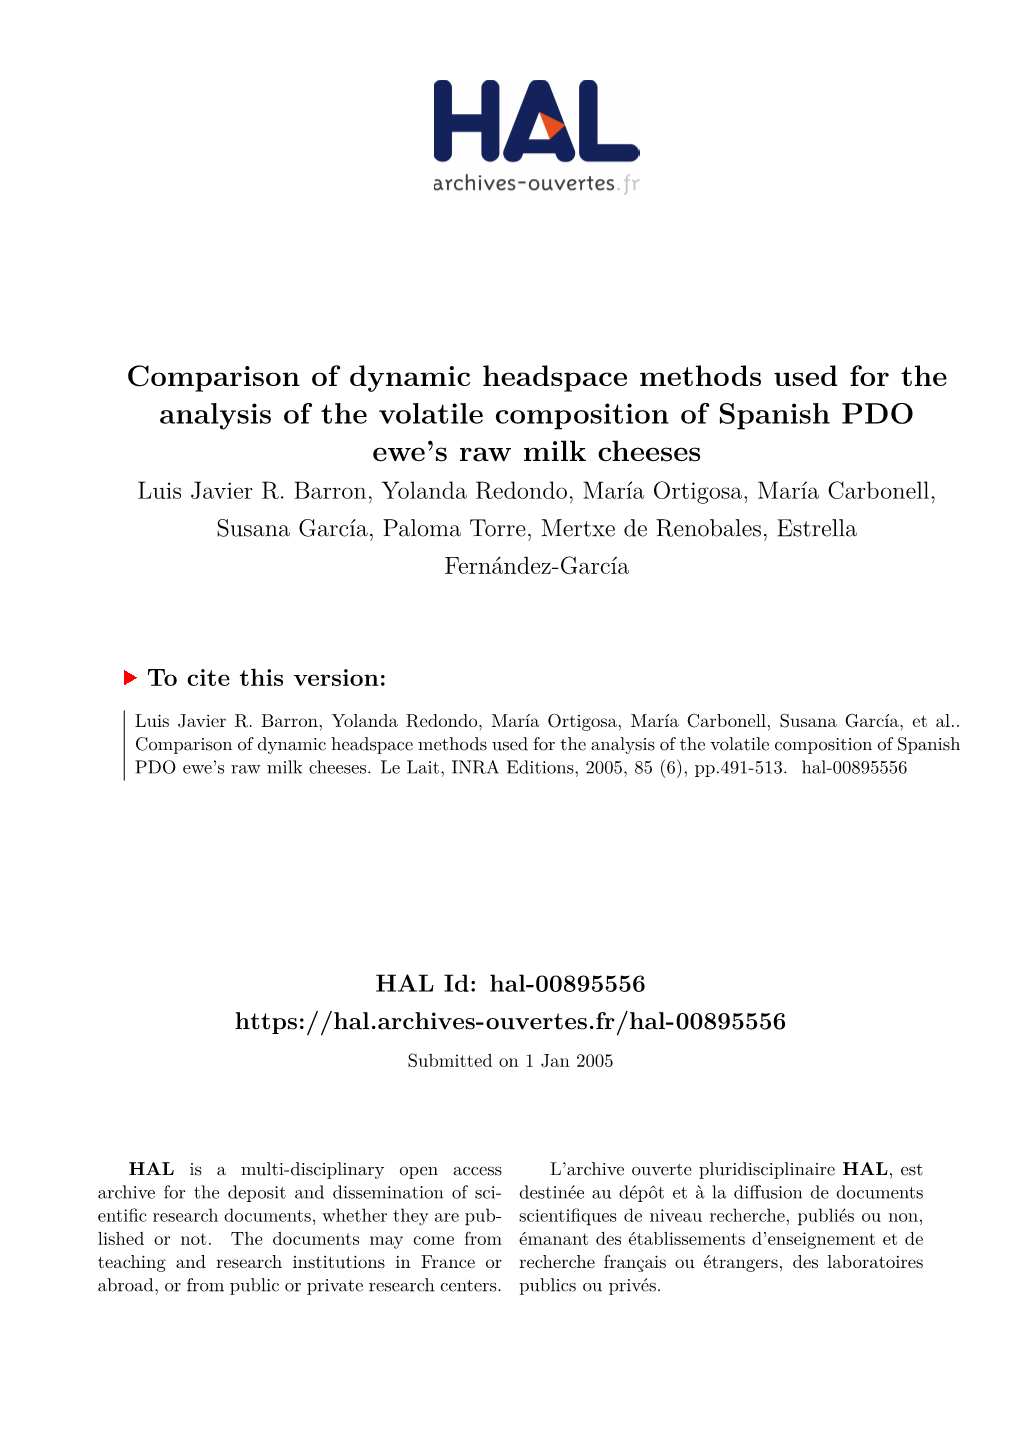 Comparison of Dynamic Headspace Methods Used for the Analysis of the Volatile Composition of Spanish PDO Ewe's Raw Milk Chee